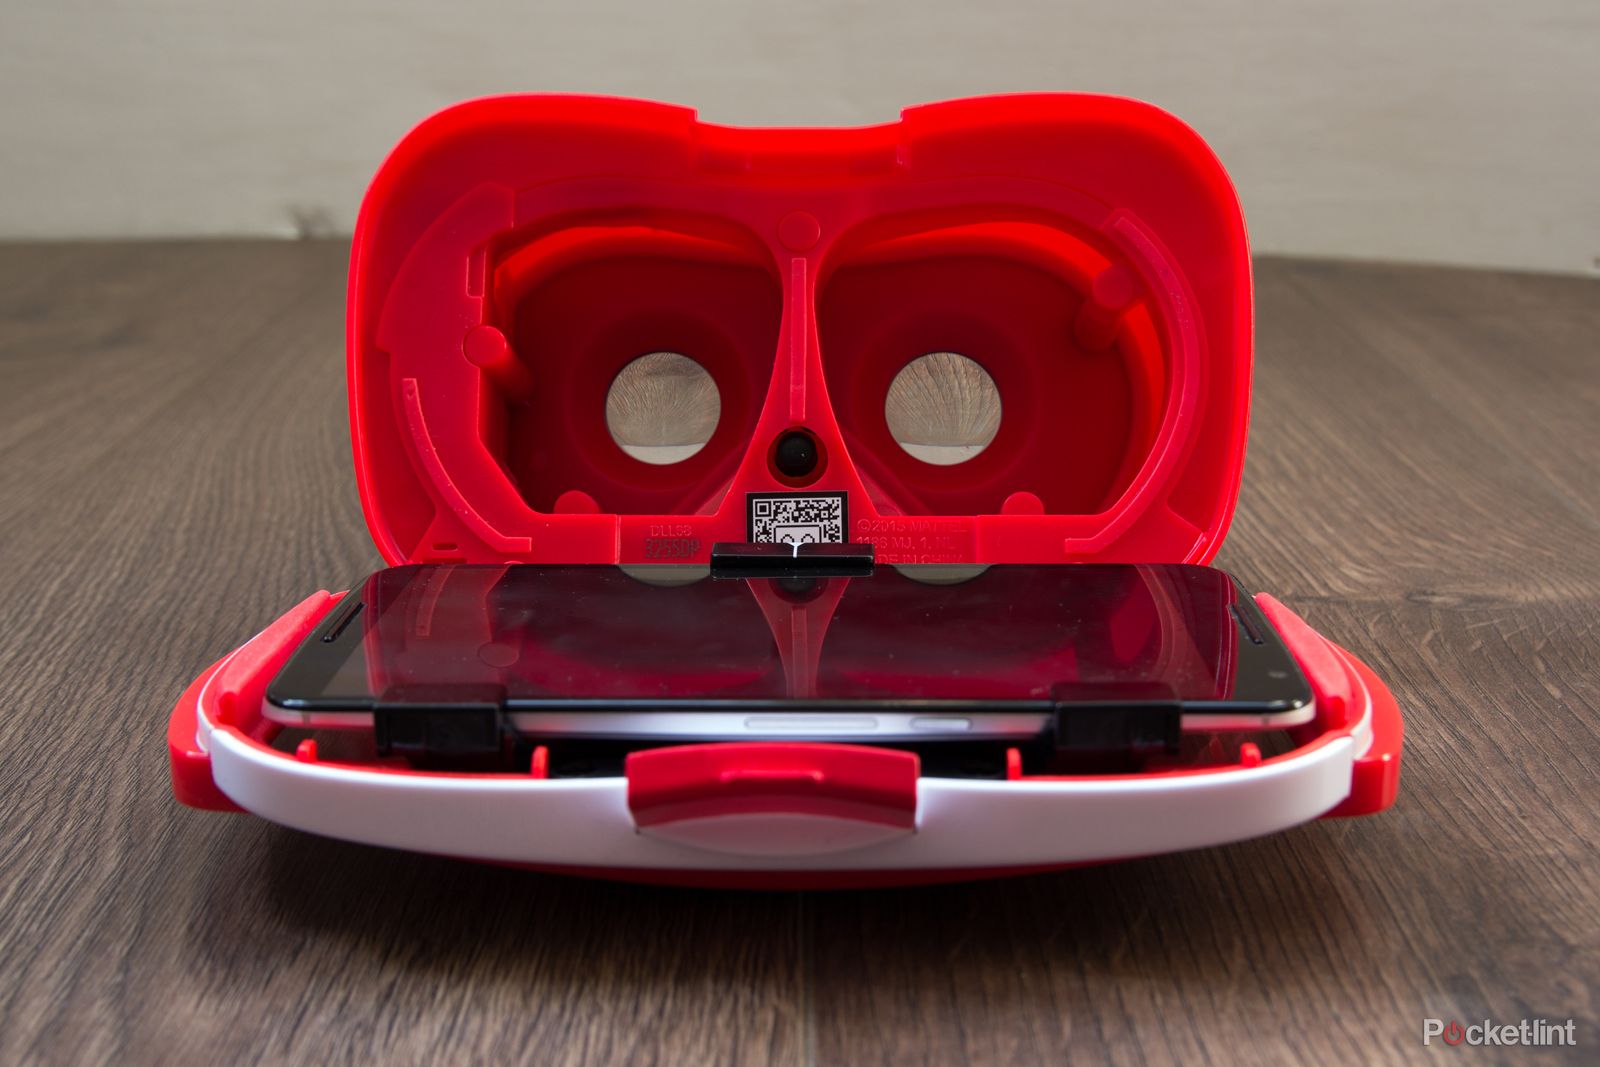 View-Master virtual reality headset review: educational but needs